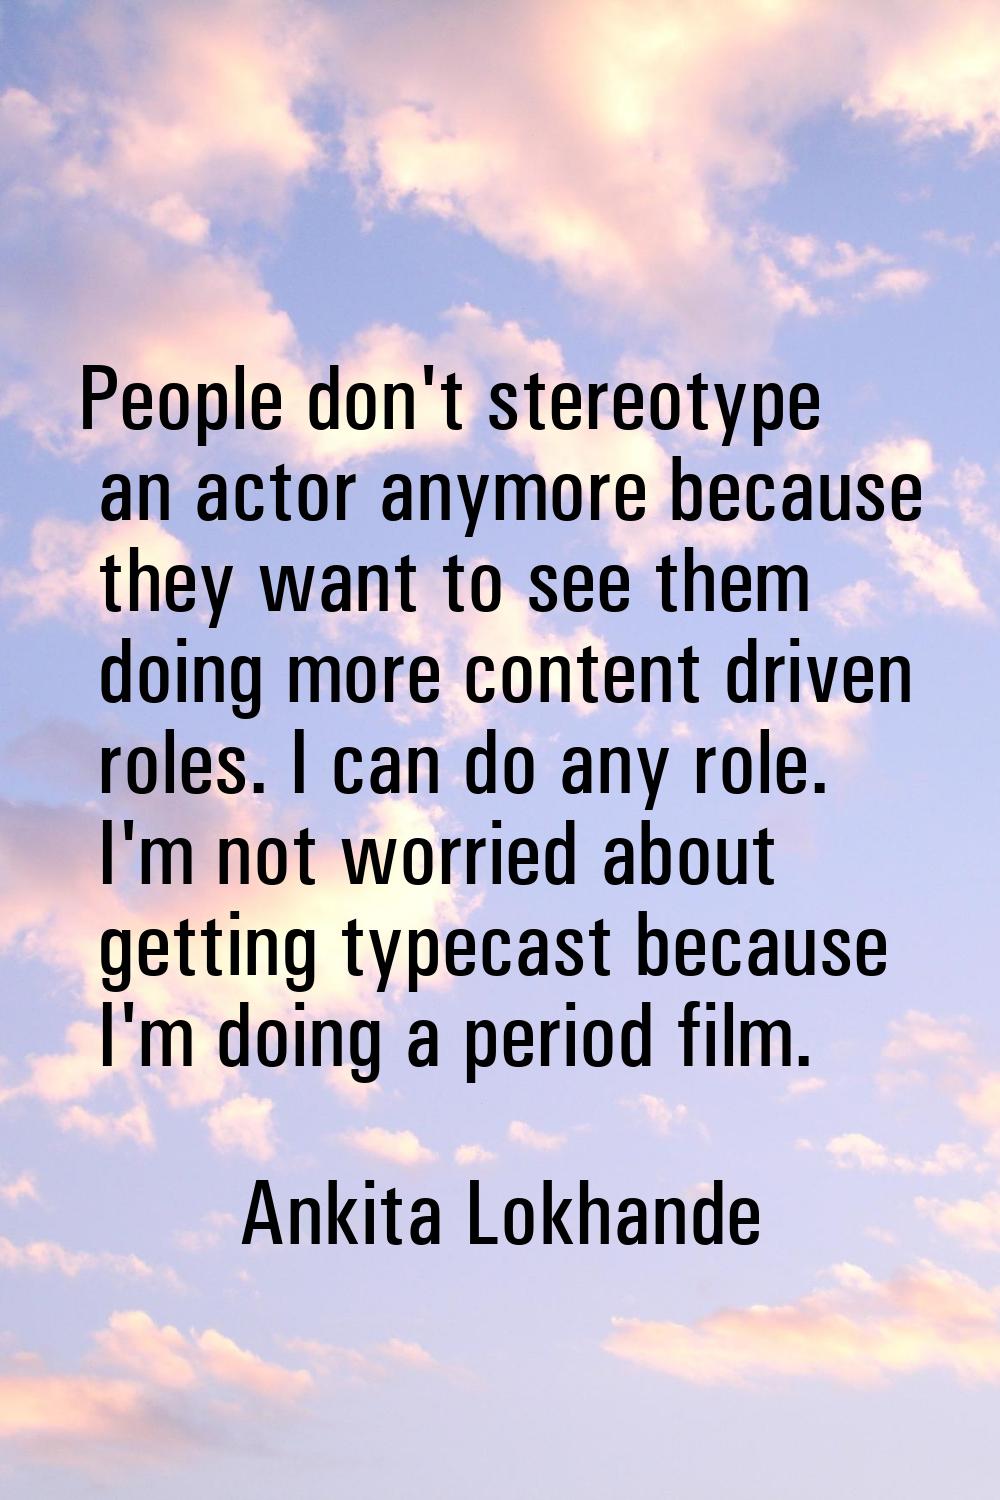 People don't stereotype an actor anymore because they want to see them doing more content driven ro